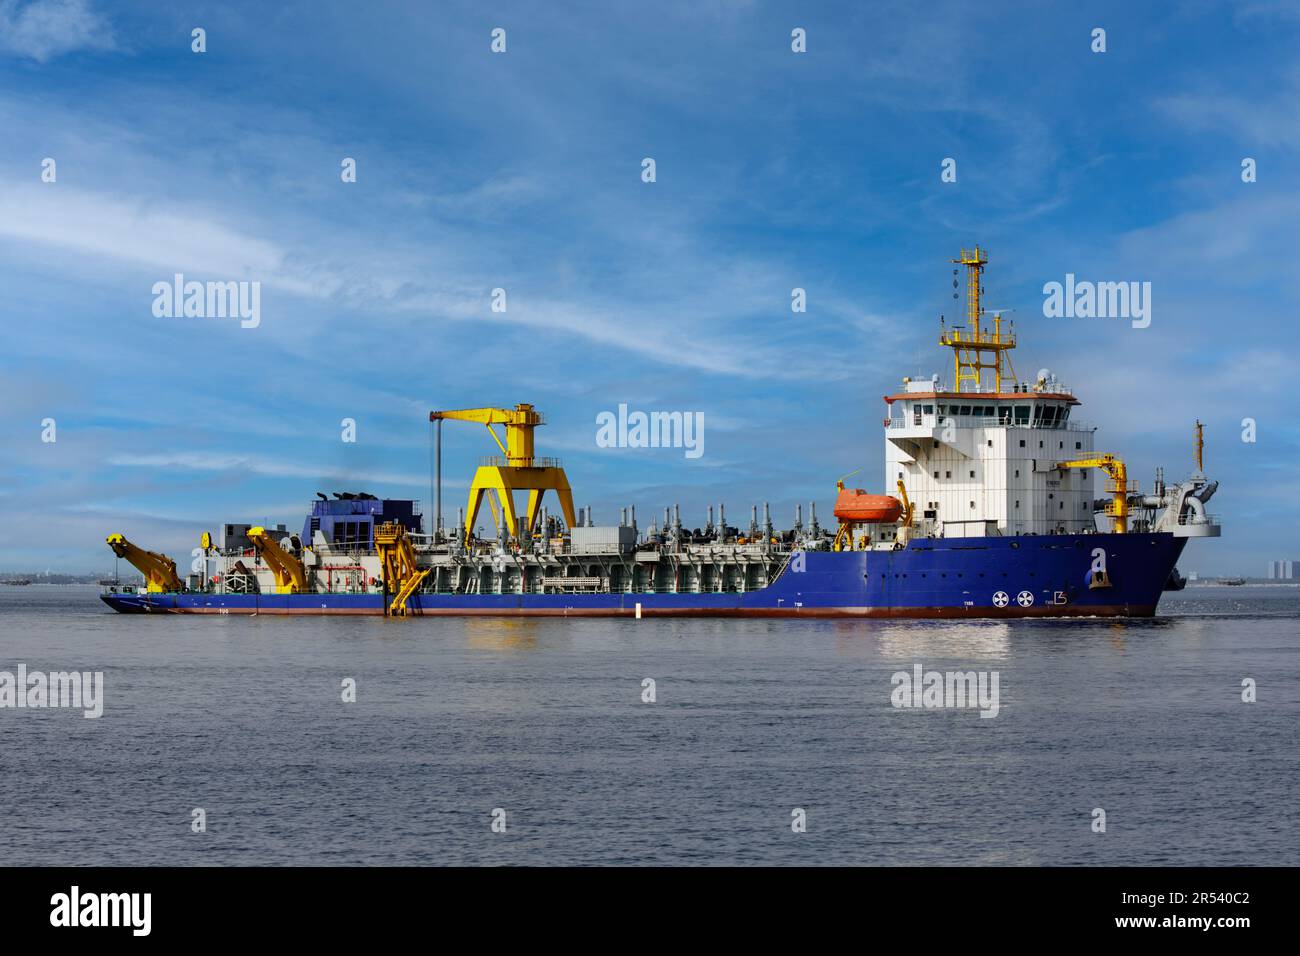 Dredging and commical excavation of Manila Bay to build commical and residentail property, Philippines Stock Photo